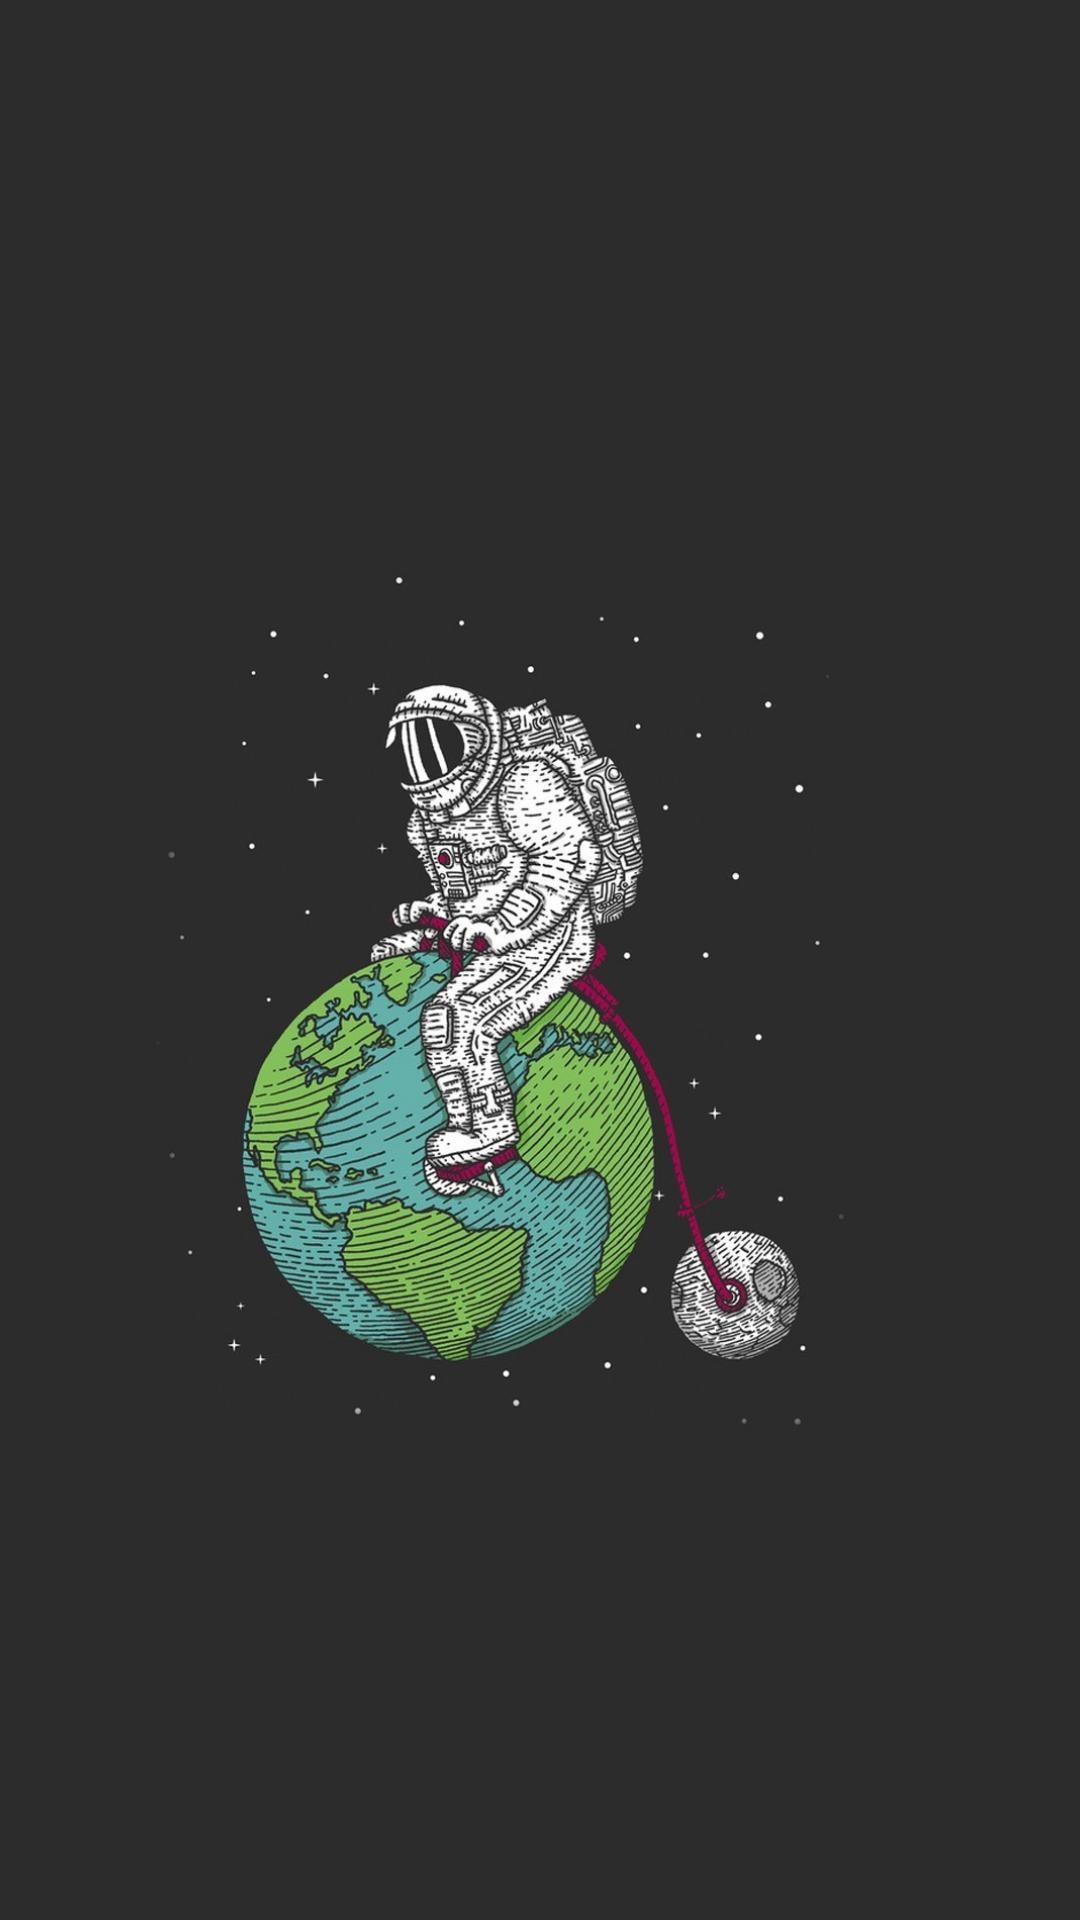 1080x1920 Astronaut Wallpaper for iphone 5